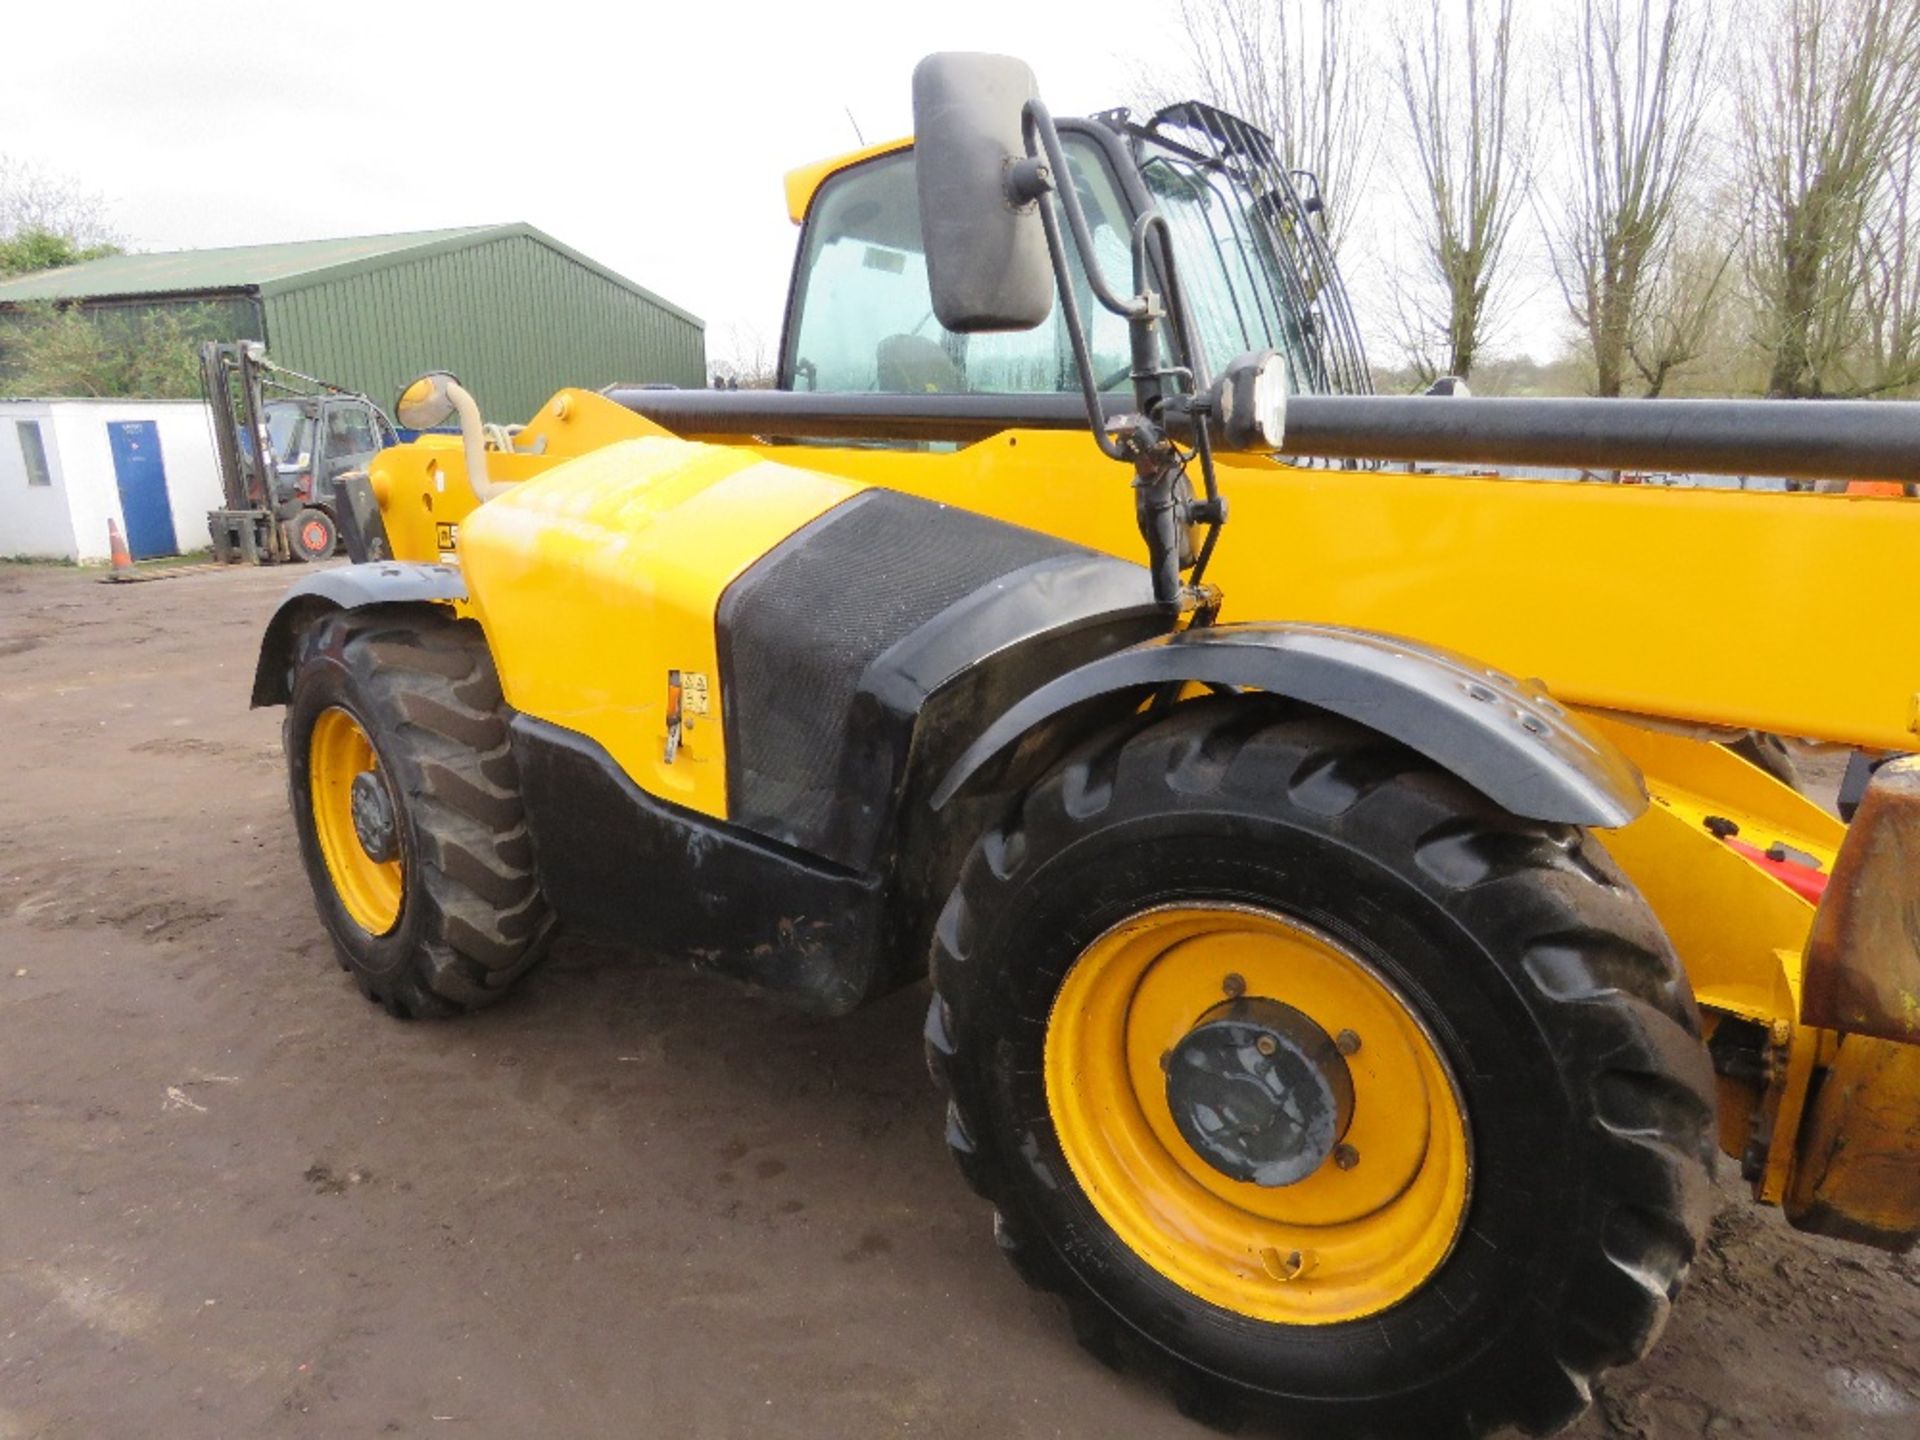 JCB 540-140 TELEHANDLER REG:RV17 YGT WITH V5. 14METRE REACH, 4 TONNE LIFT, 9676 REC HOURS. OWNED FRO - Image 4 of 14